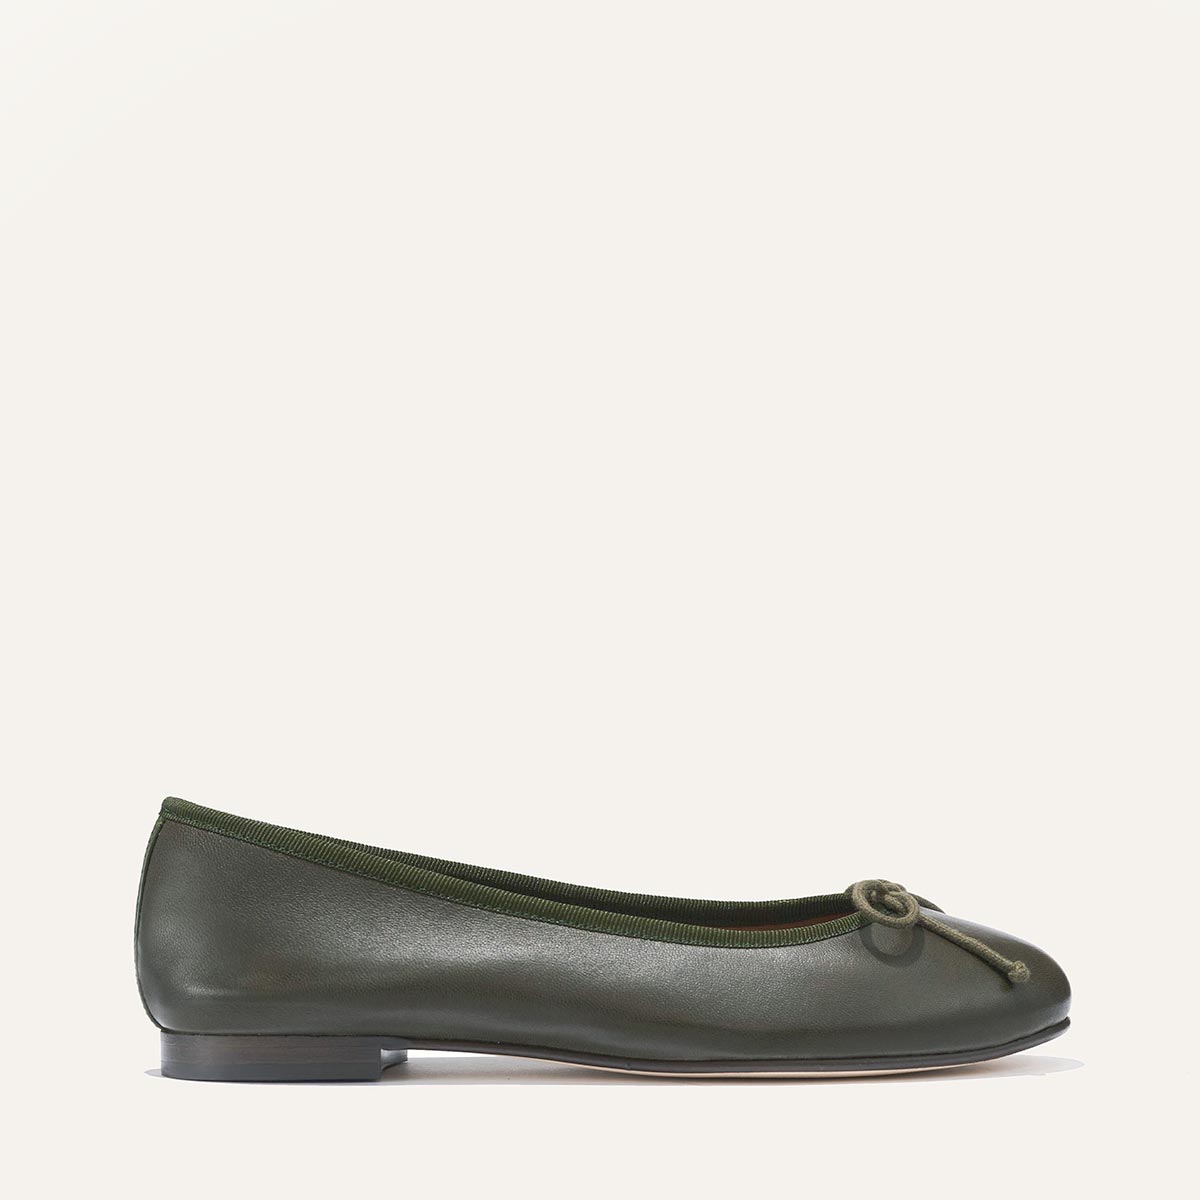 Margaux Ballet Flats - The Demi - Olive Nappa